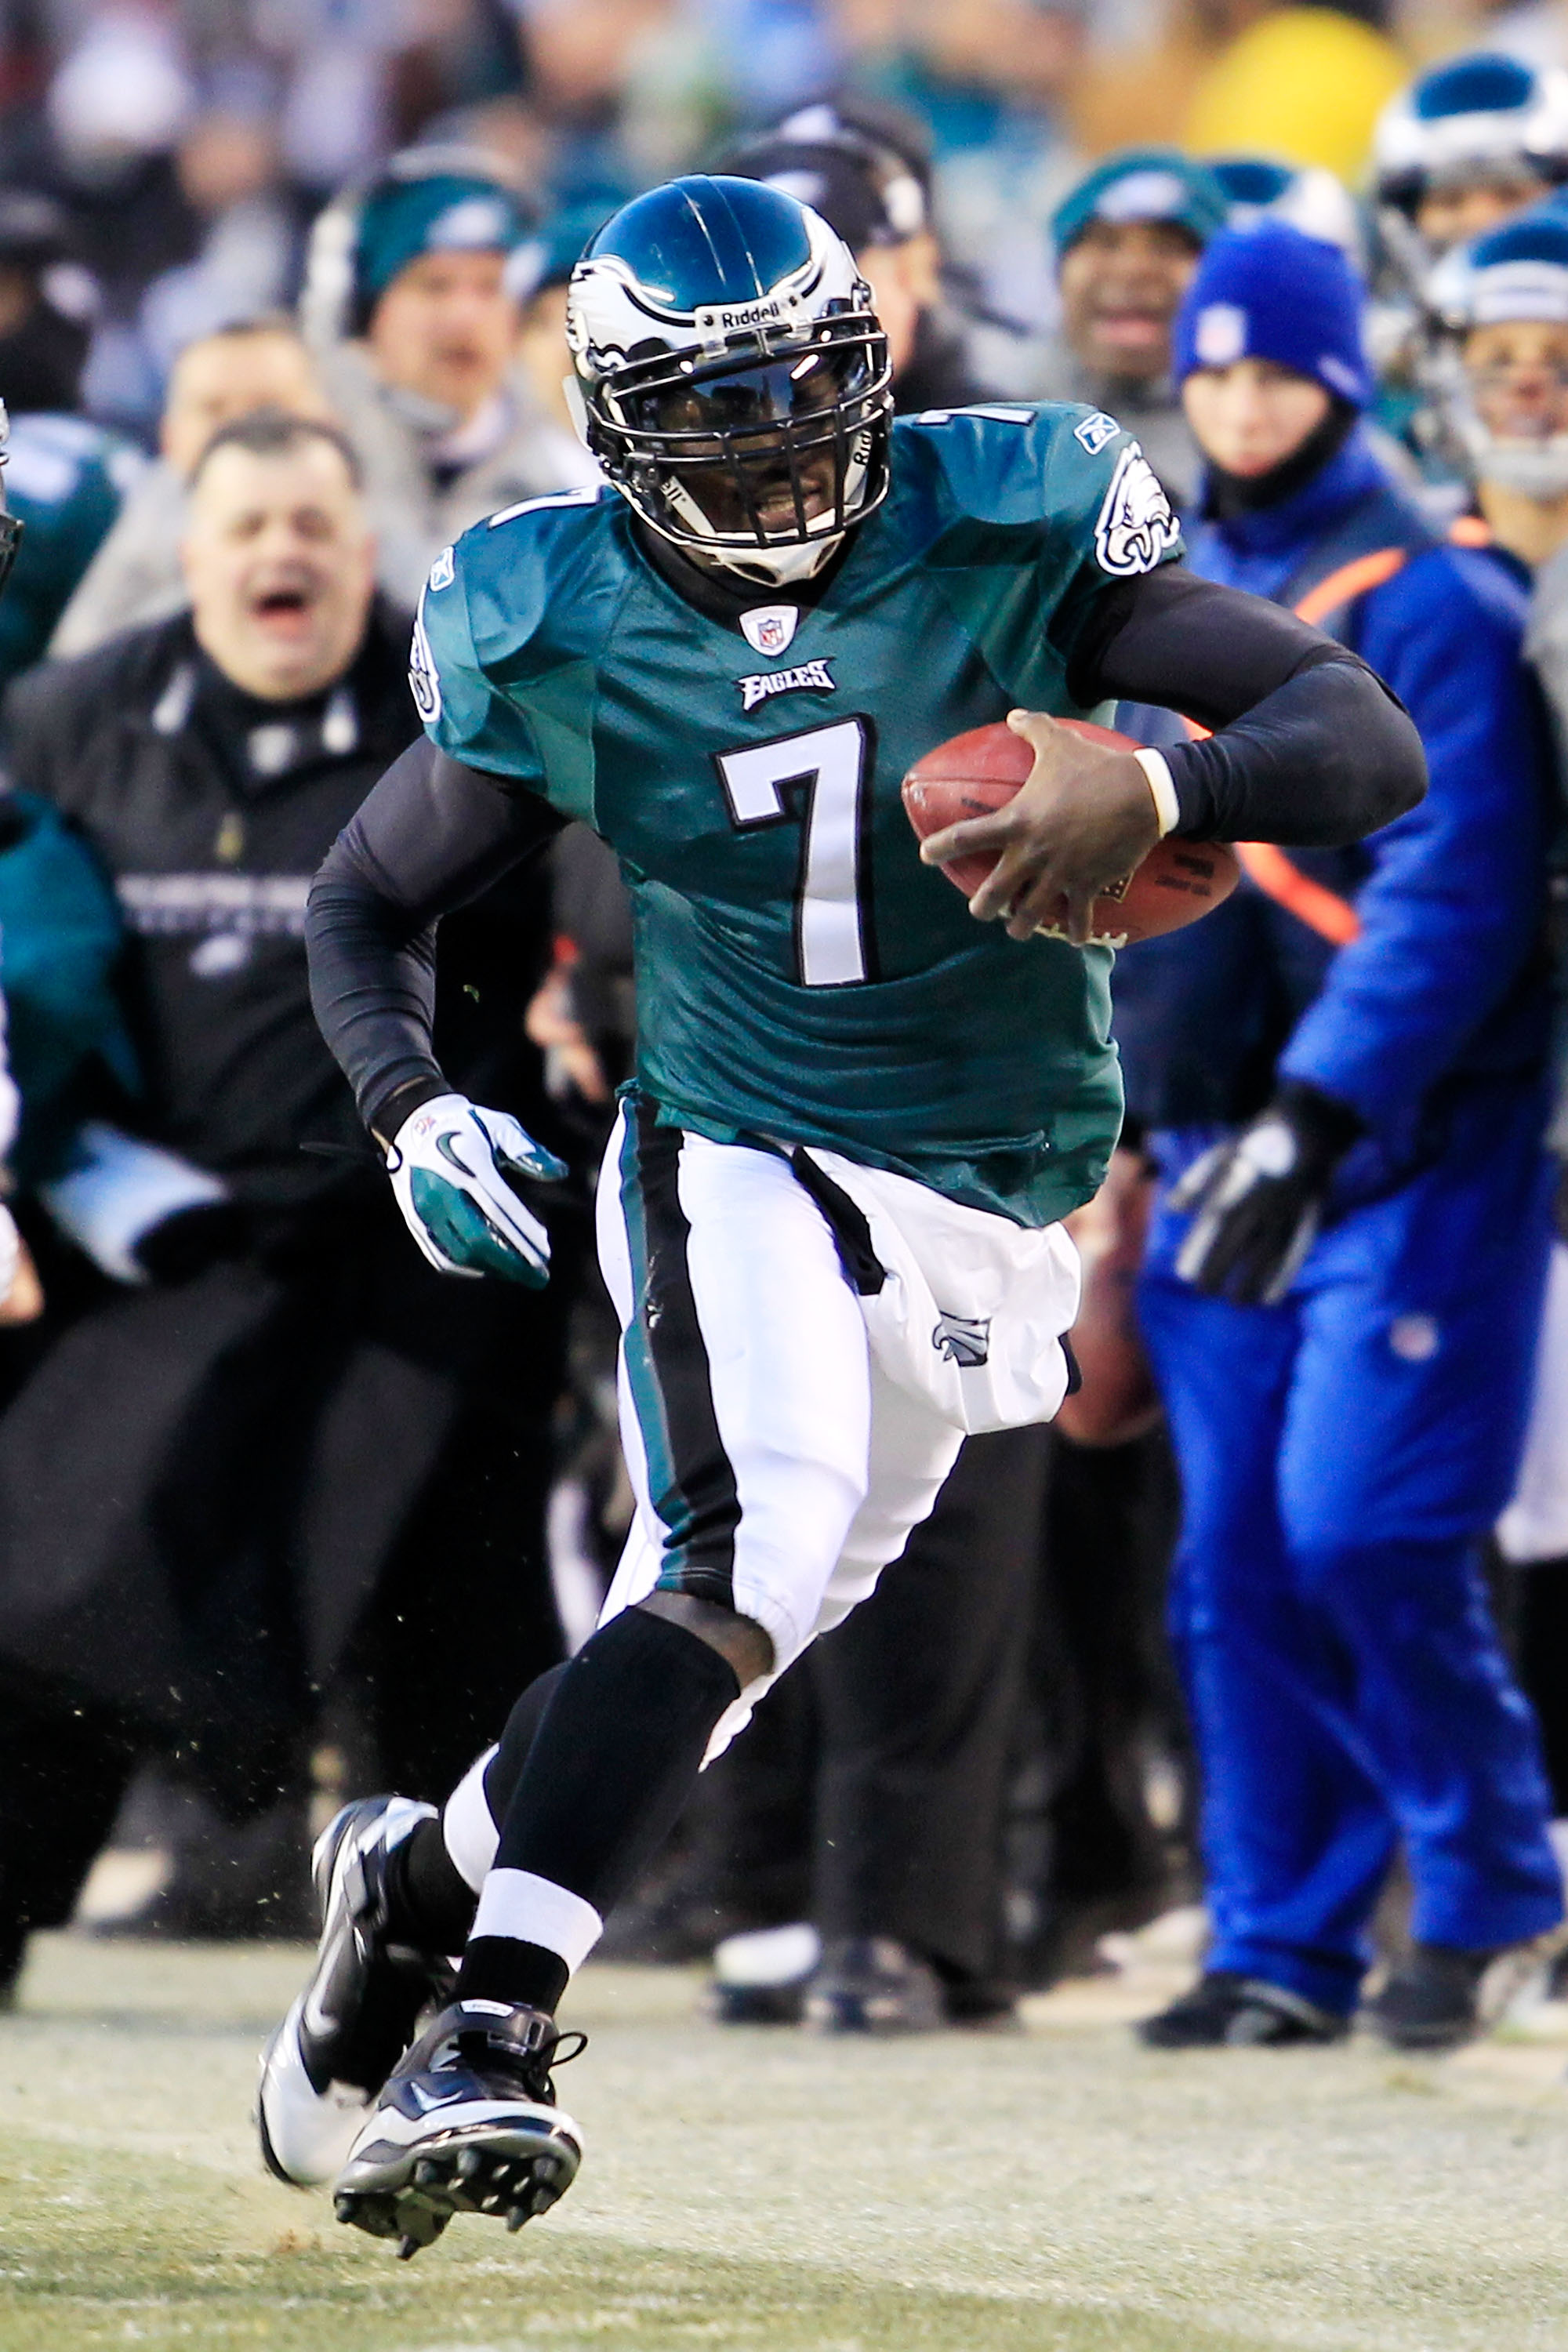 PHILADELPHIA, PA - JANUARY 09:  Michael Vick #7 of the Philadelphia Eagles runs down field against the Green Bay Packers during the 2011 NFC wild card playoff game at Lincoln Financial Field on January 9, 2011 in Philadelphia, Pennsylvania.  (Photo by Chr